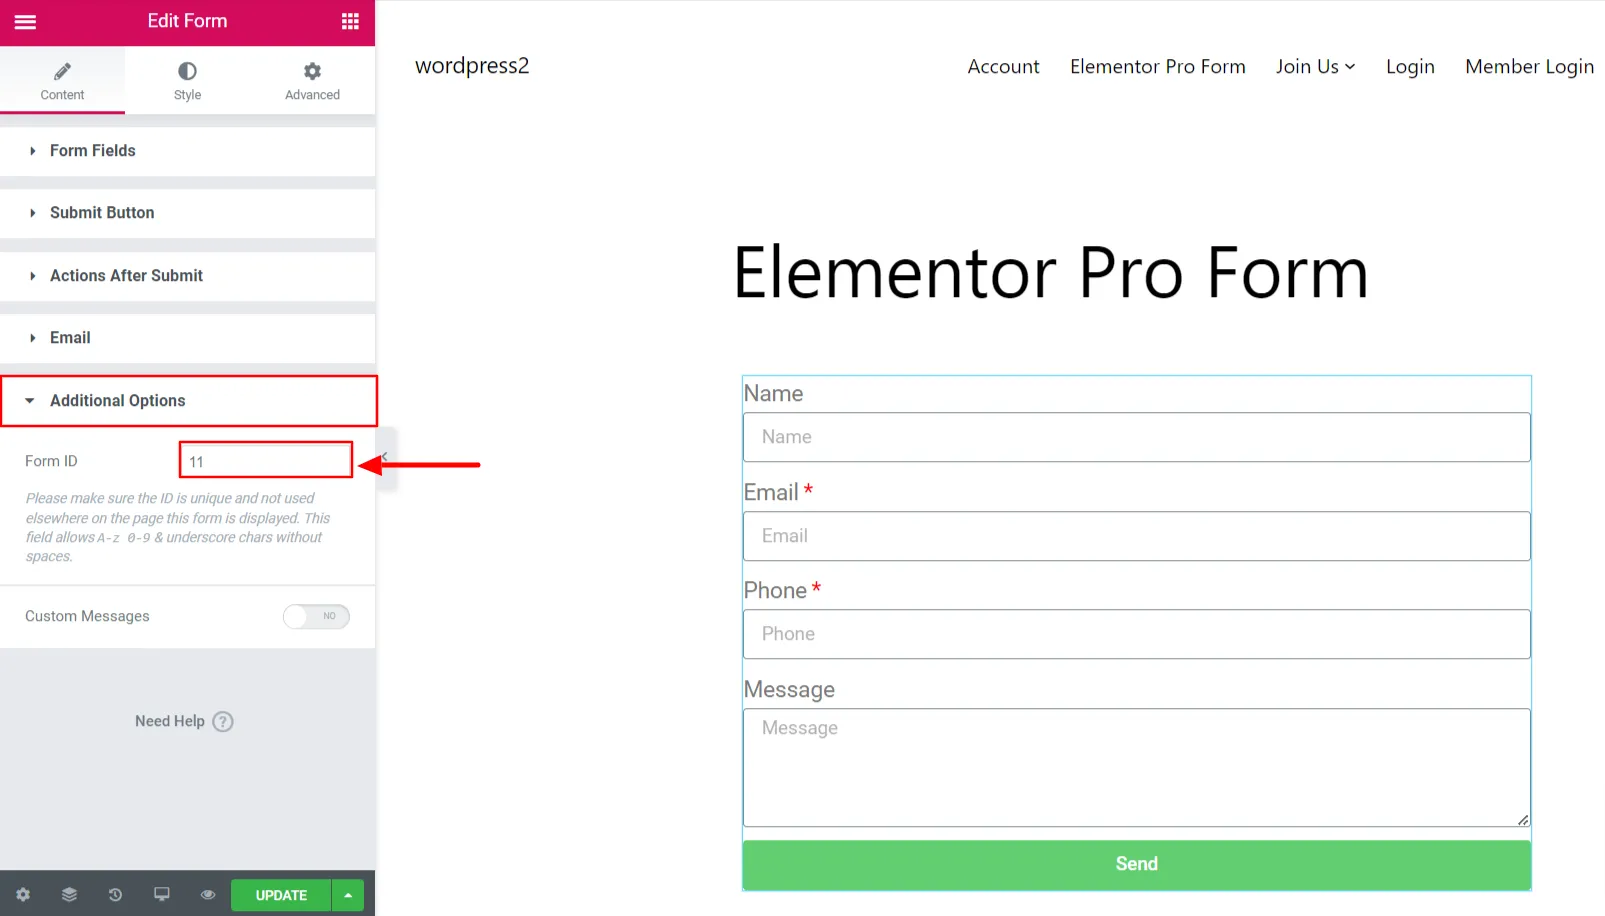 Elementor Pro Form - Note Phone ID